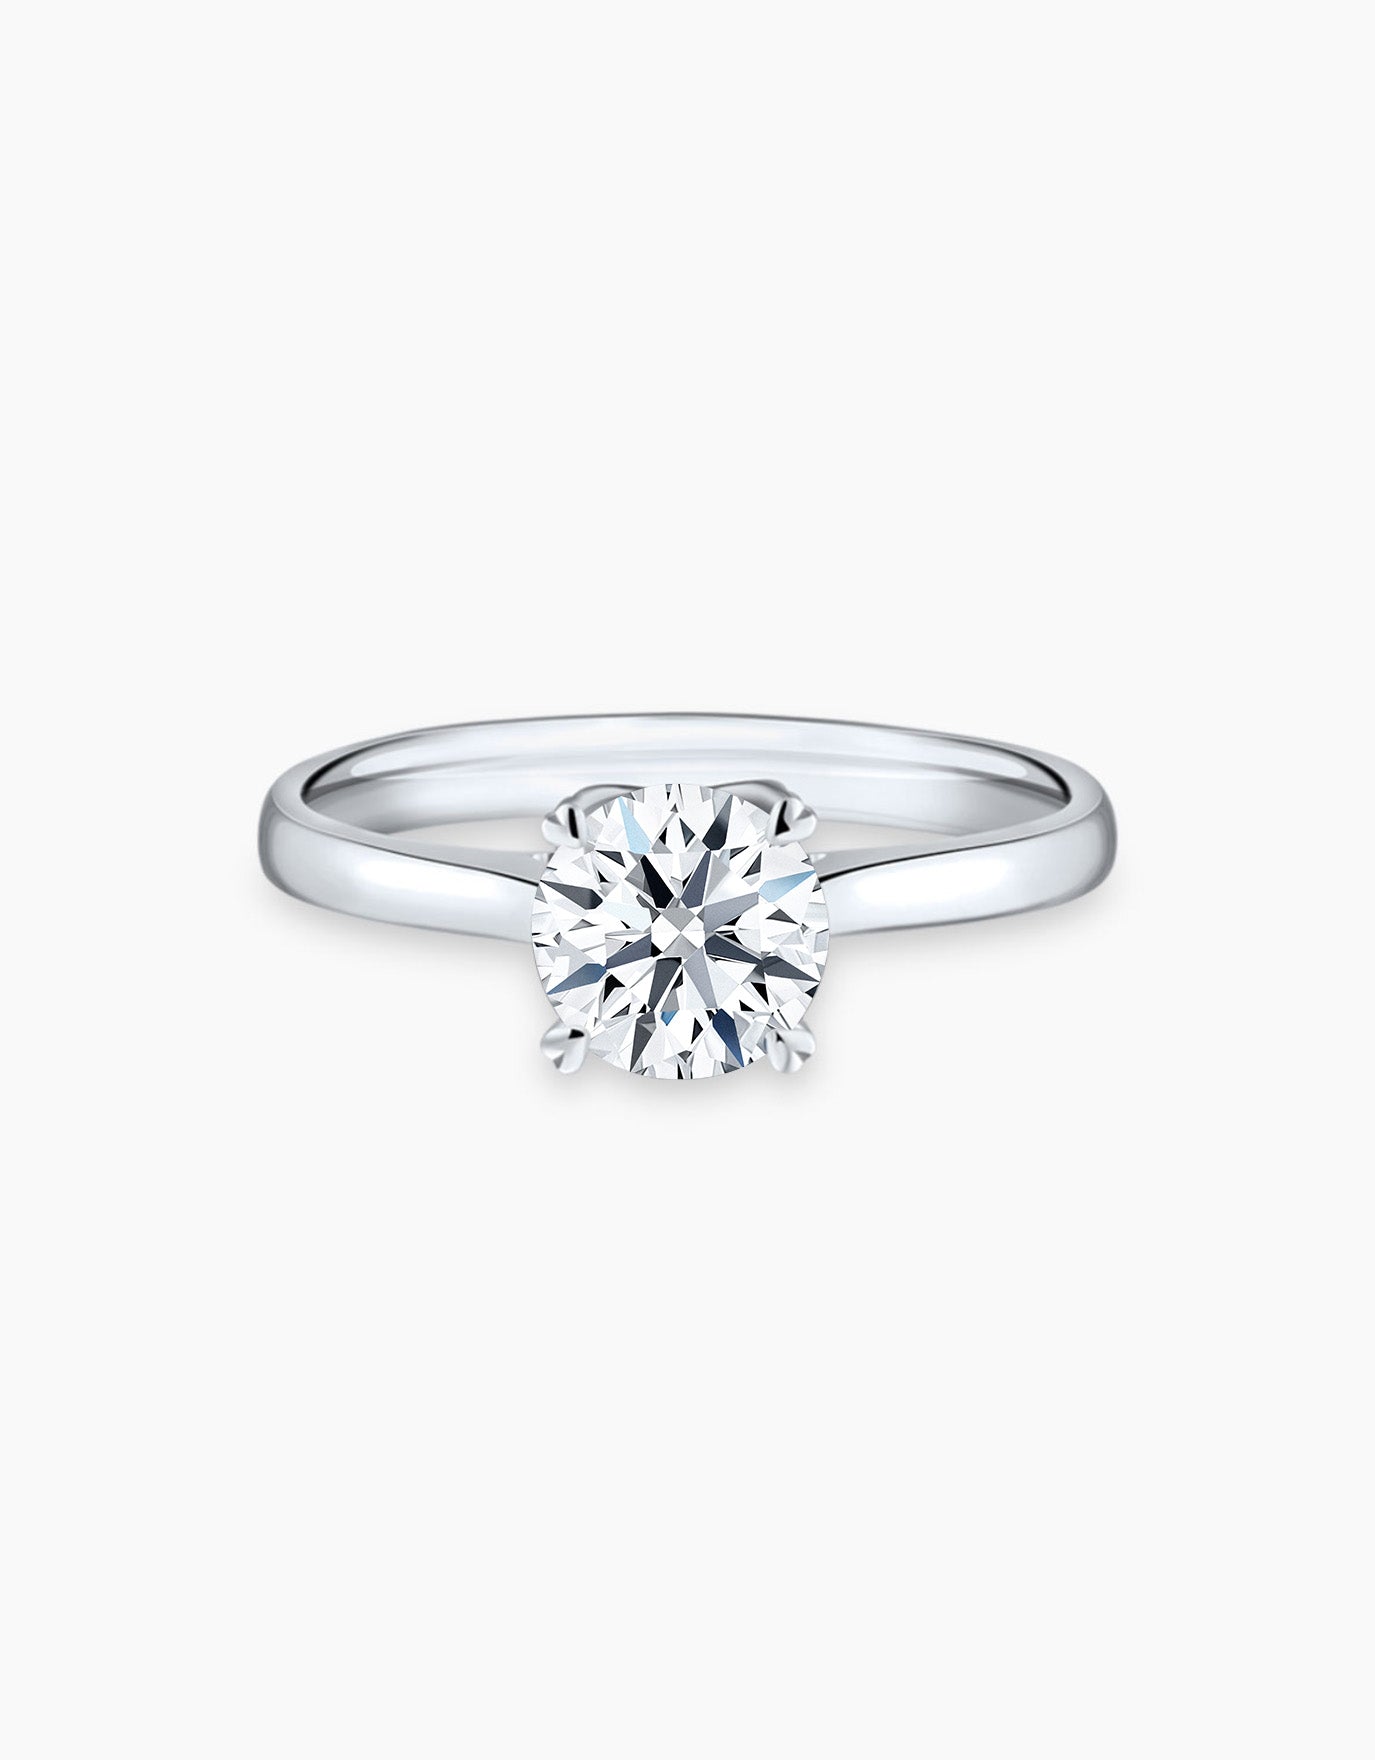 LVC Precieux Armor Solitaire Diamond Ring with Heart Shaped Prongs